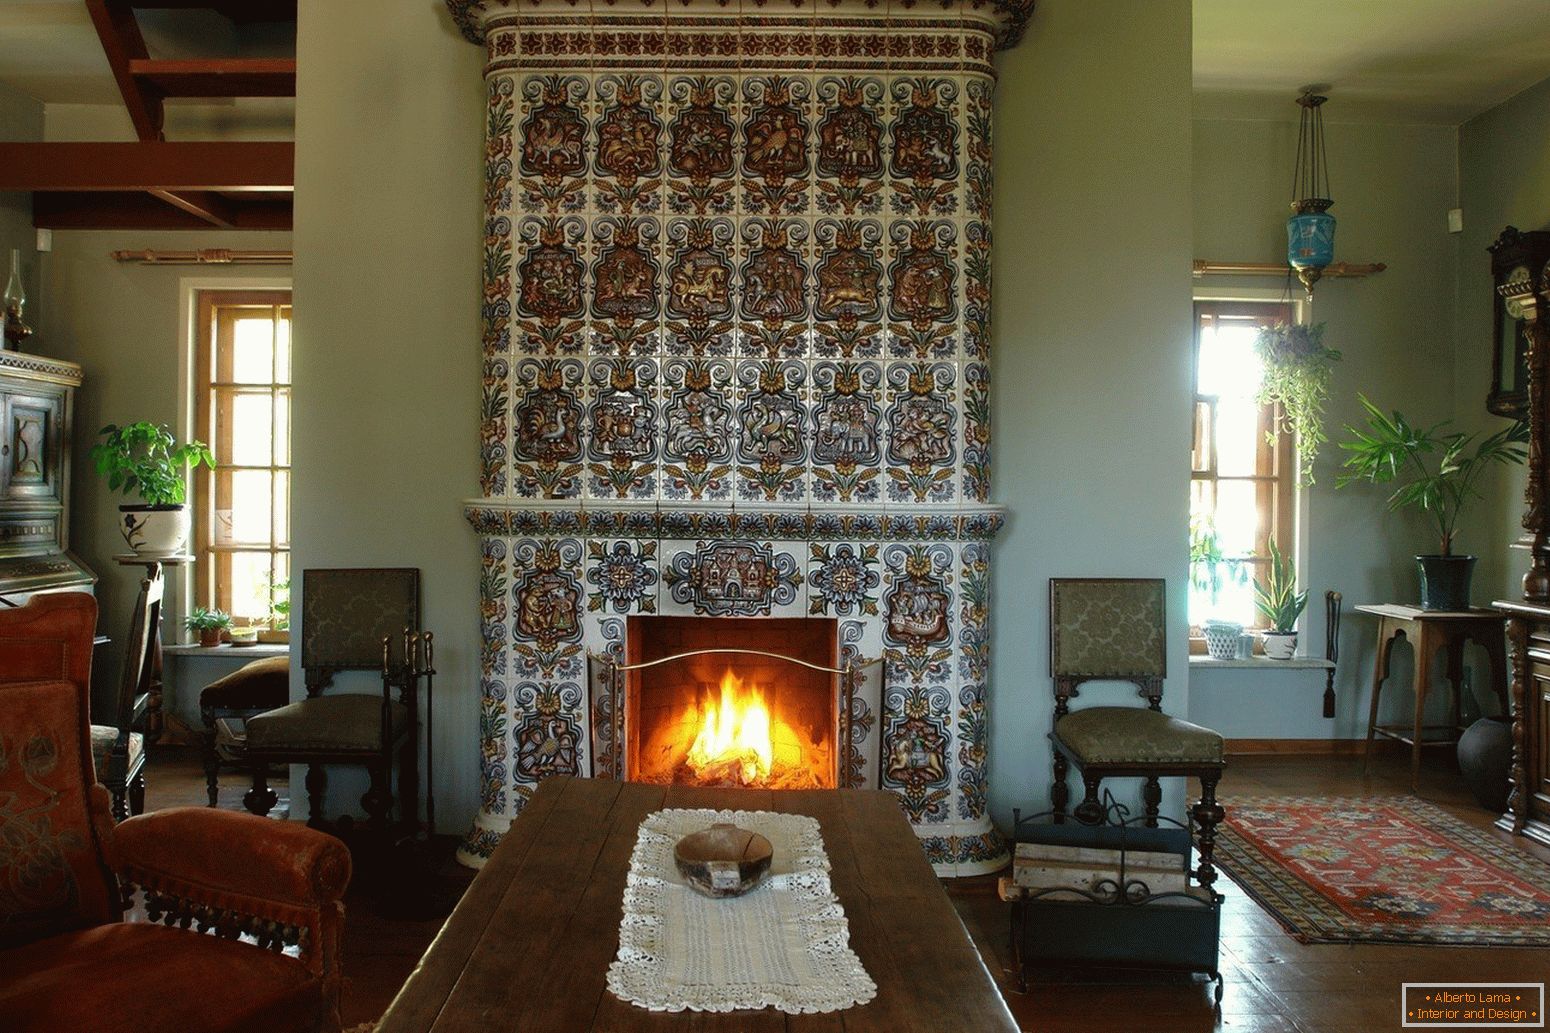 Fireplace-stove decorated with tiles